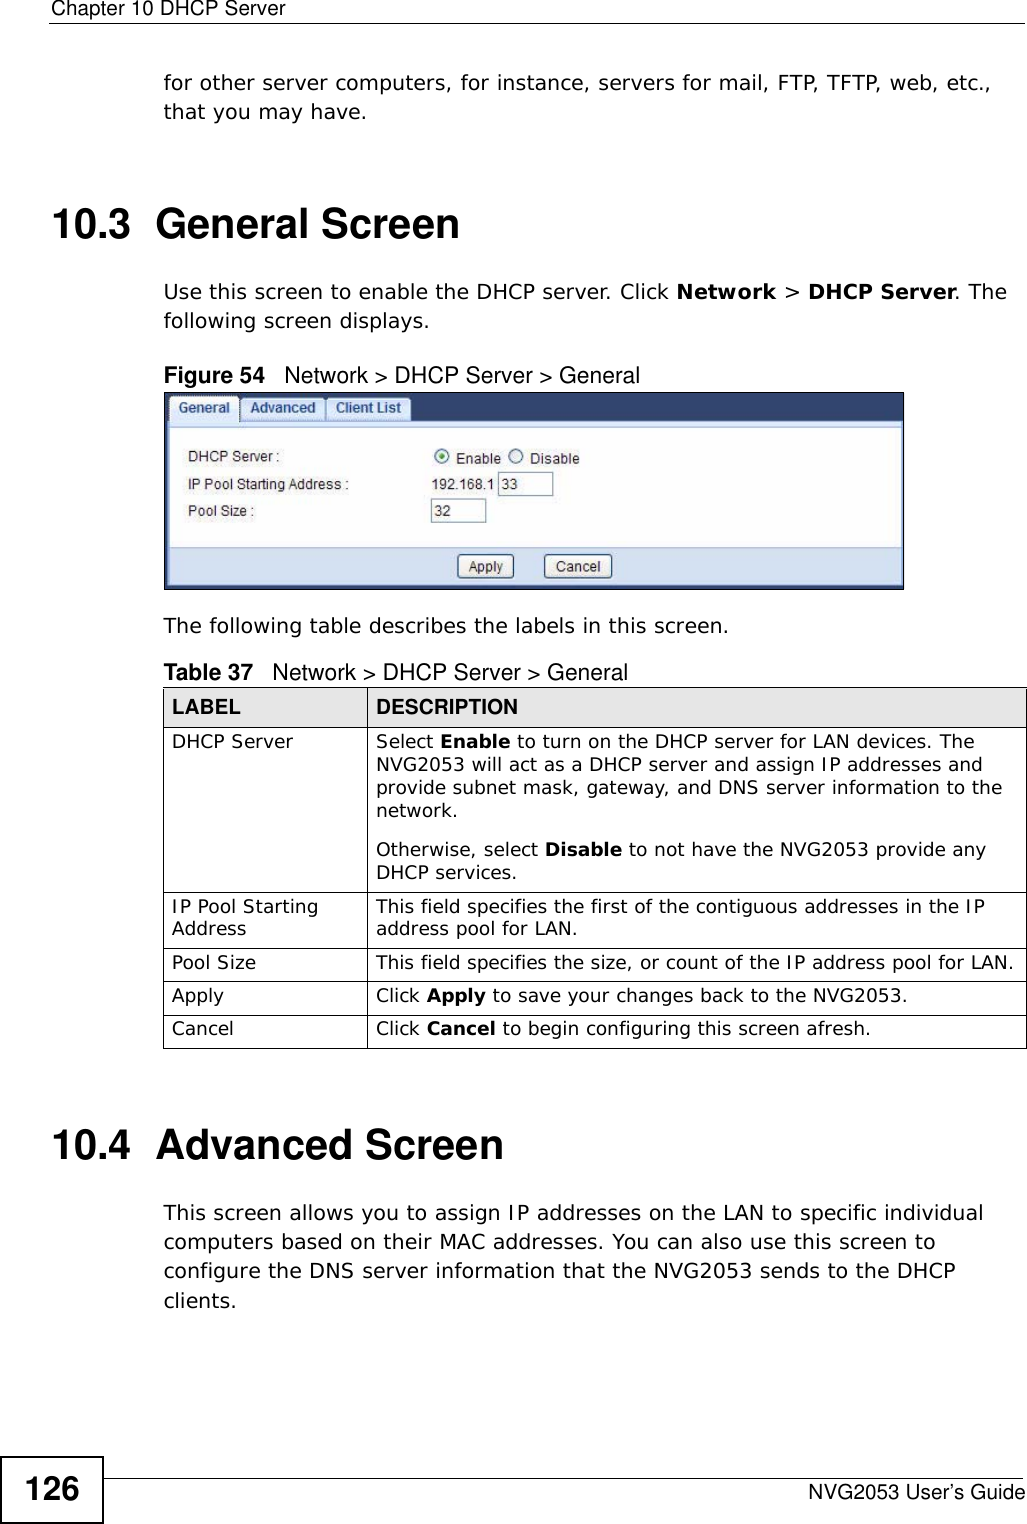 Chapter 10 DHCP ServerNVG2053 User’s Guide126for other server computers, for instance, servers for mail, FTP, TFTP, web, etc., that you may have.10.3  General ScreenUse this screen to enable the DHCP server. Click Network &gt; DHCP Server. The following screen displays.Figure 54   Network &gt; DHCP Server &gt; General   The following table describes the labels in this screen.10.4  Advanced Screen    This screen allows you to assign IP addresses on the LAN to specific individual computers based on their MAC addresses. You can also use this screen to configure the DNS server information that the NVG2053 sends to the DHCP clients.Table 37   Network &gt; DHCP Server &gt; General LABEL DESCRIPTIONDHCP Server Select Enable to turn on the DHCP server for LAN devices. The NVG2053 will act as a DHCP server and assign IP addresses and provide subnet mask, gateway, and DNS server information to the network. Otherwise, select Disable to not have the NVG2053 provide any DHCP services.IP Pool Starting Address This field specifies the first of the contiguous addresses in the IP address pool for LAN.Pool Size This field specifies the size, or count of the IP address pool for LAN.Apply Click Apply to save your changes back to the NVG2053.Cancel Click Cancel to begin configuring this screen afresh.